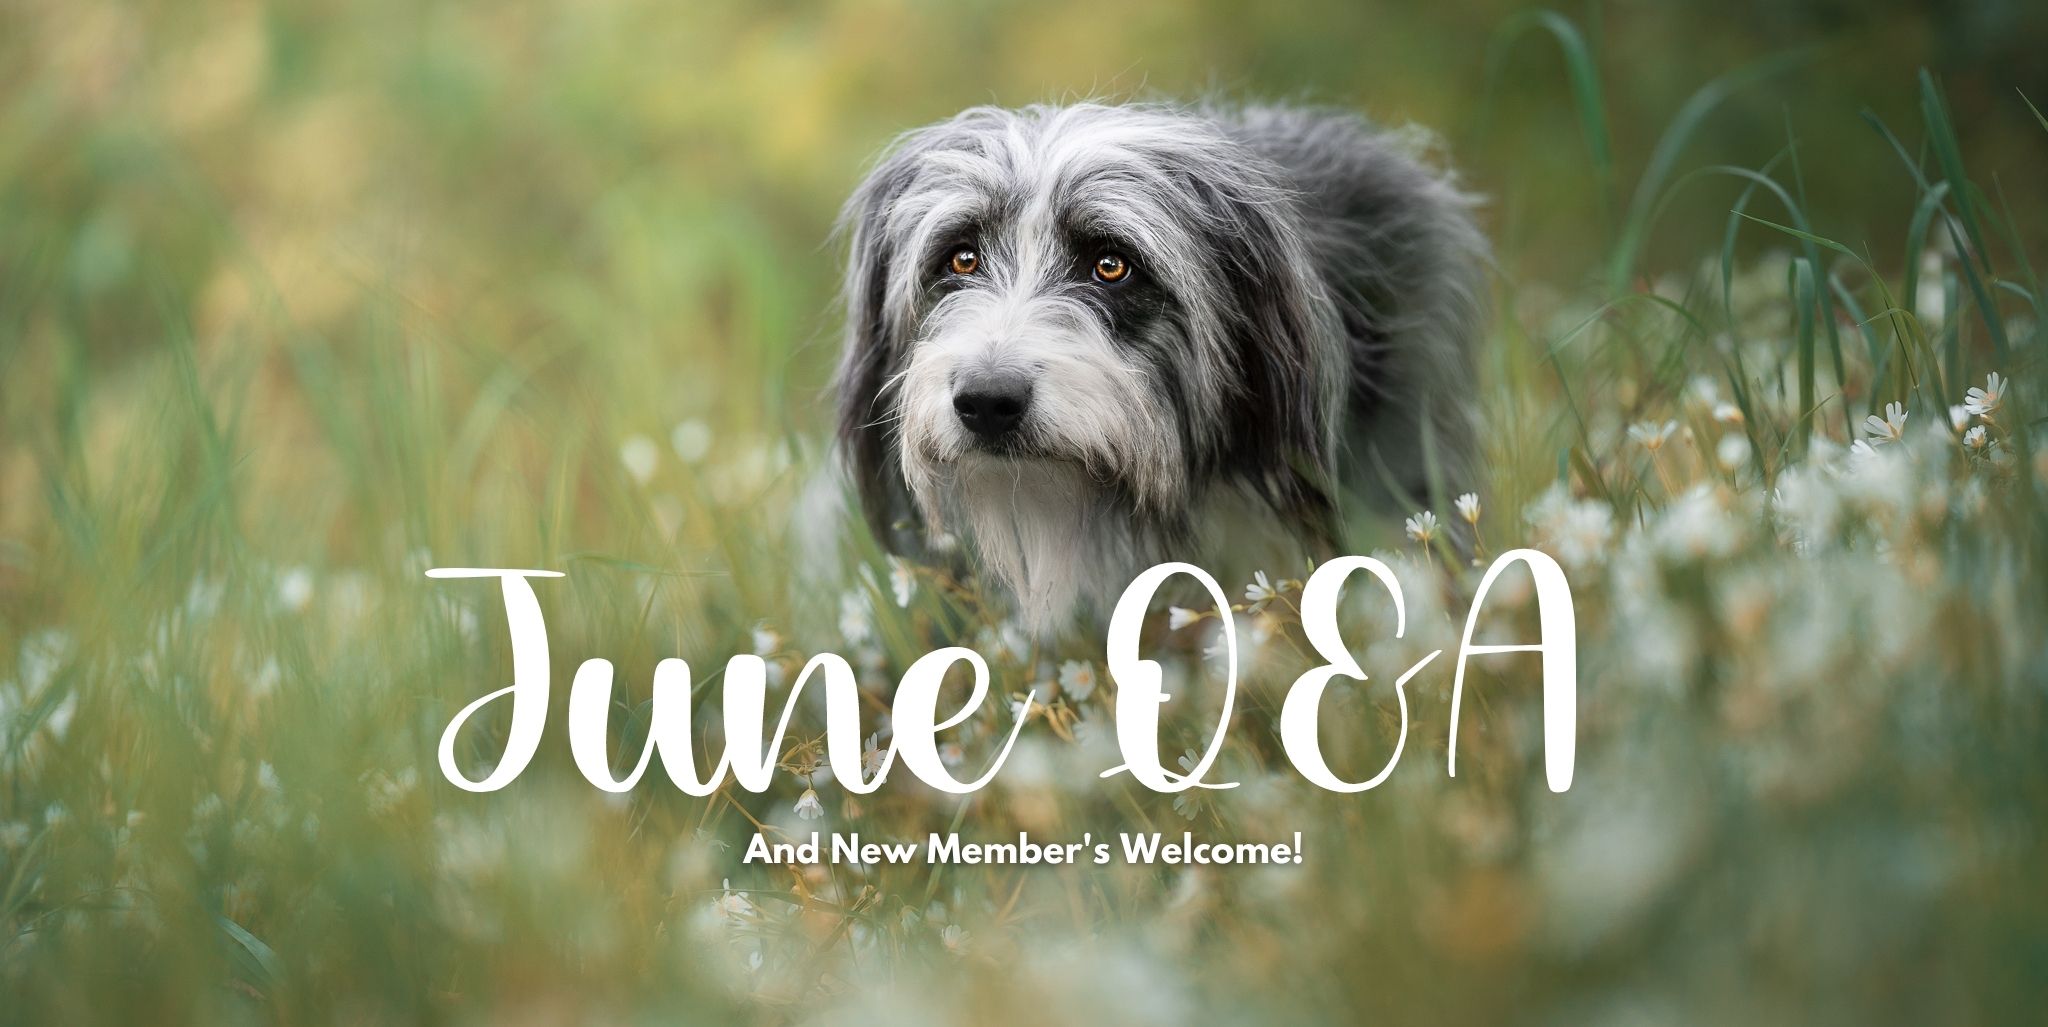 June 2022 Q&A and New Member’s Welcome!